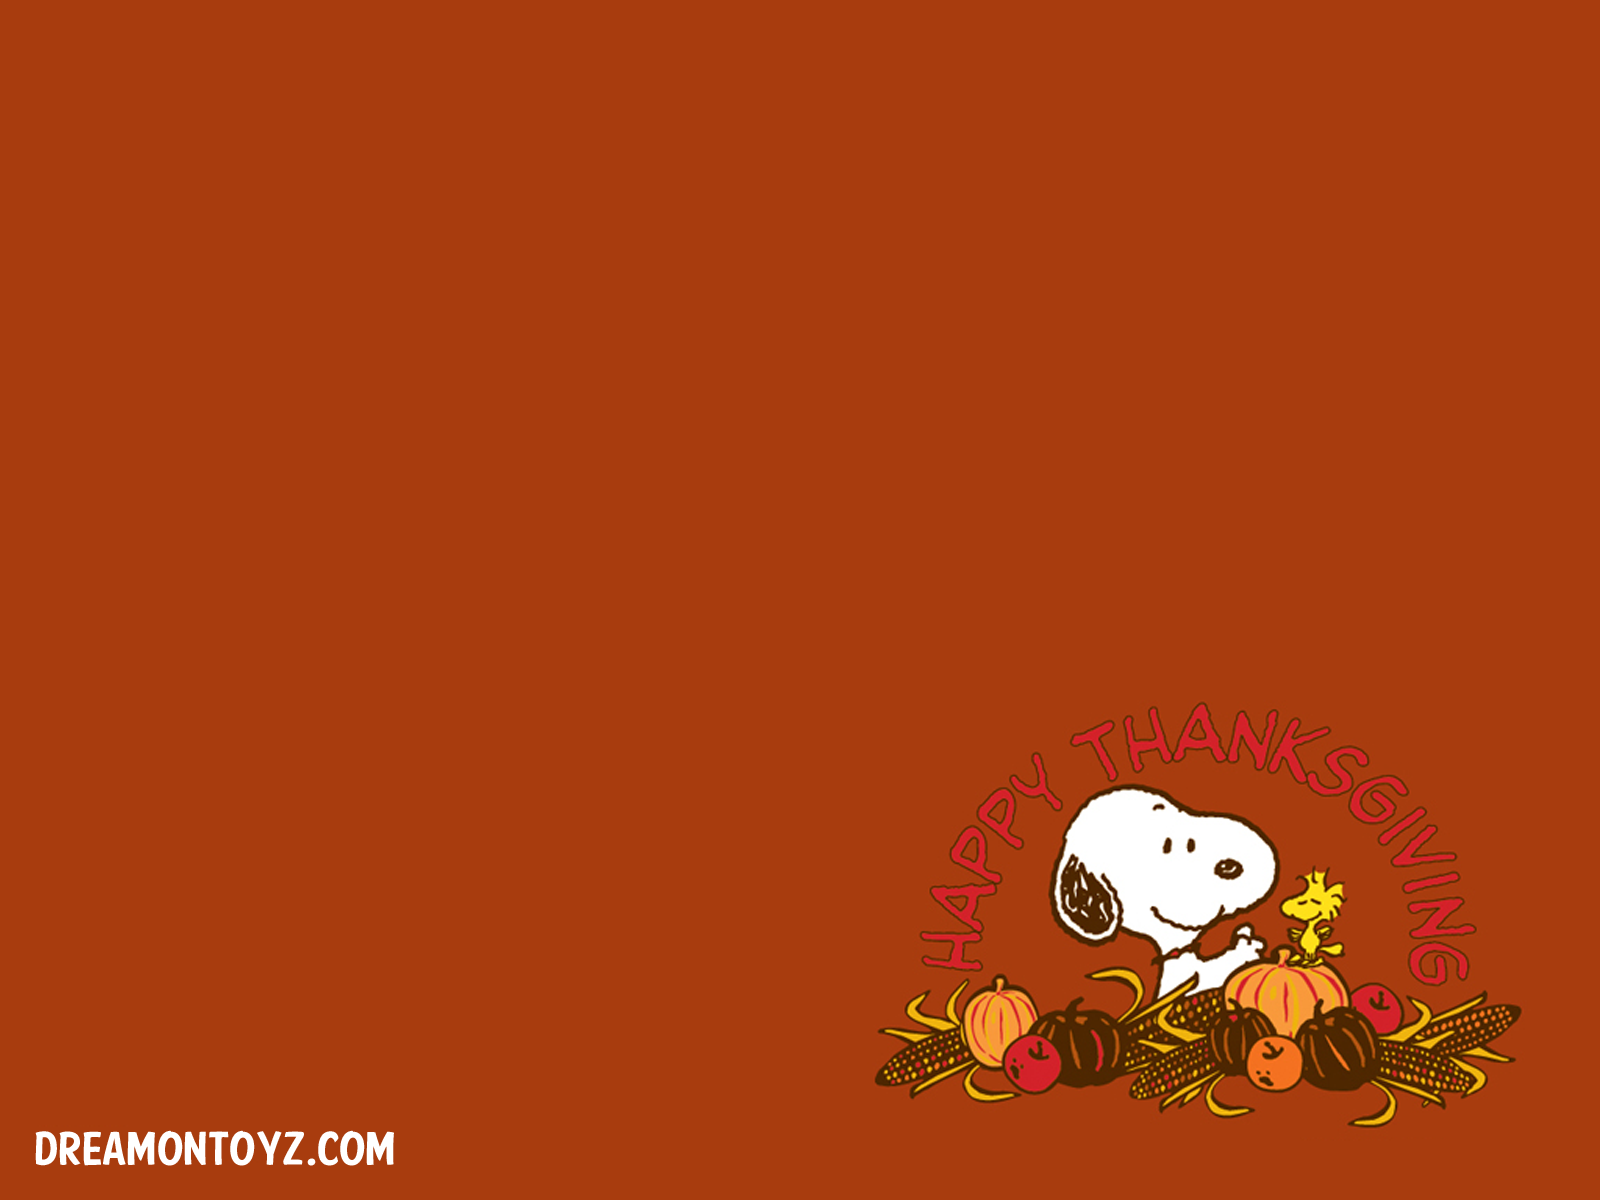  Pics Gifs Photographs Peanuts Snoopy Thanksgiving wallpapers